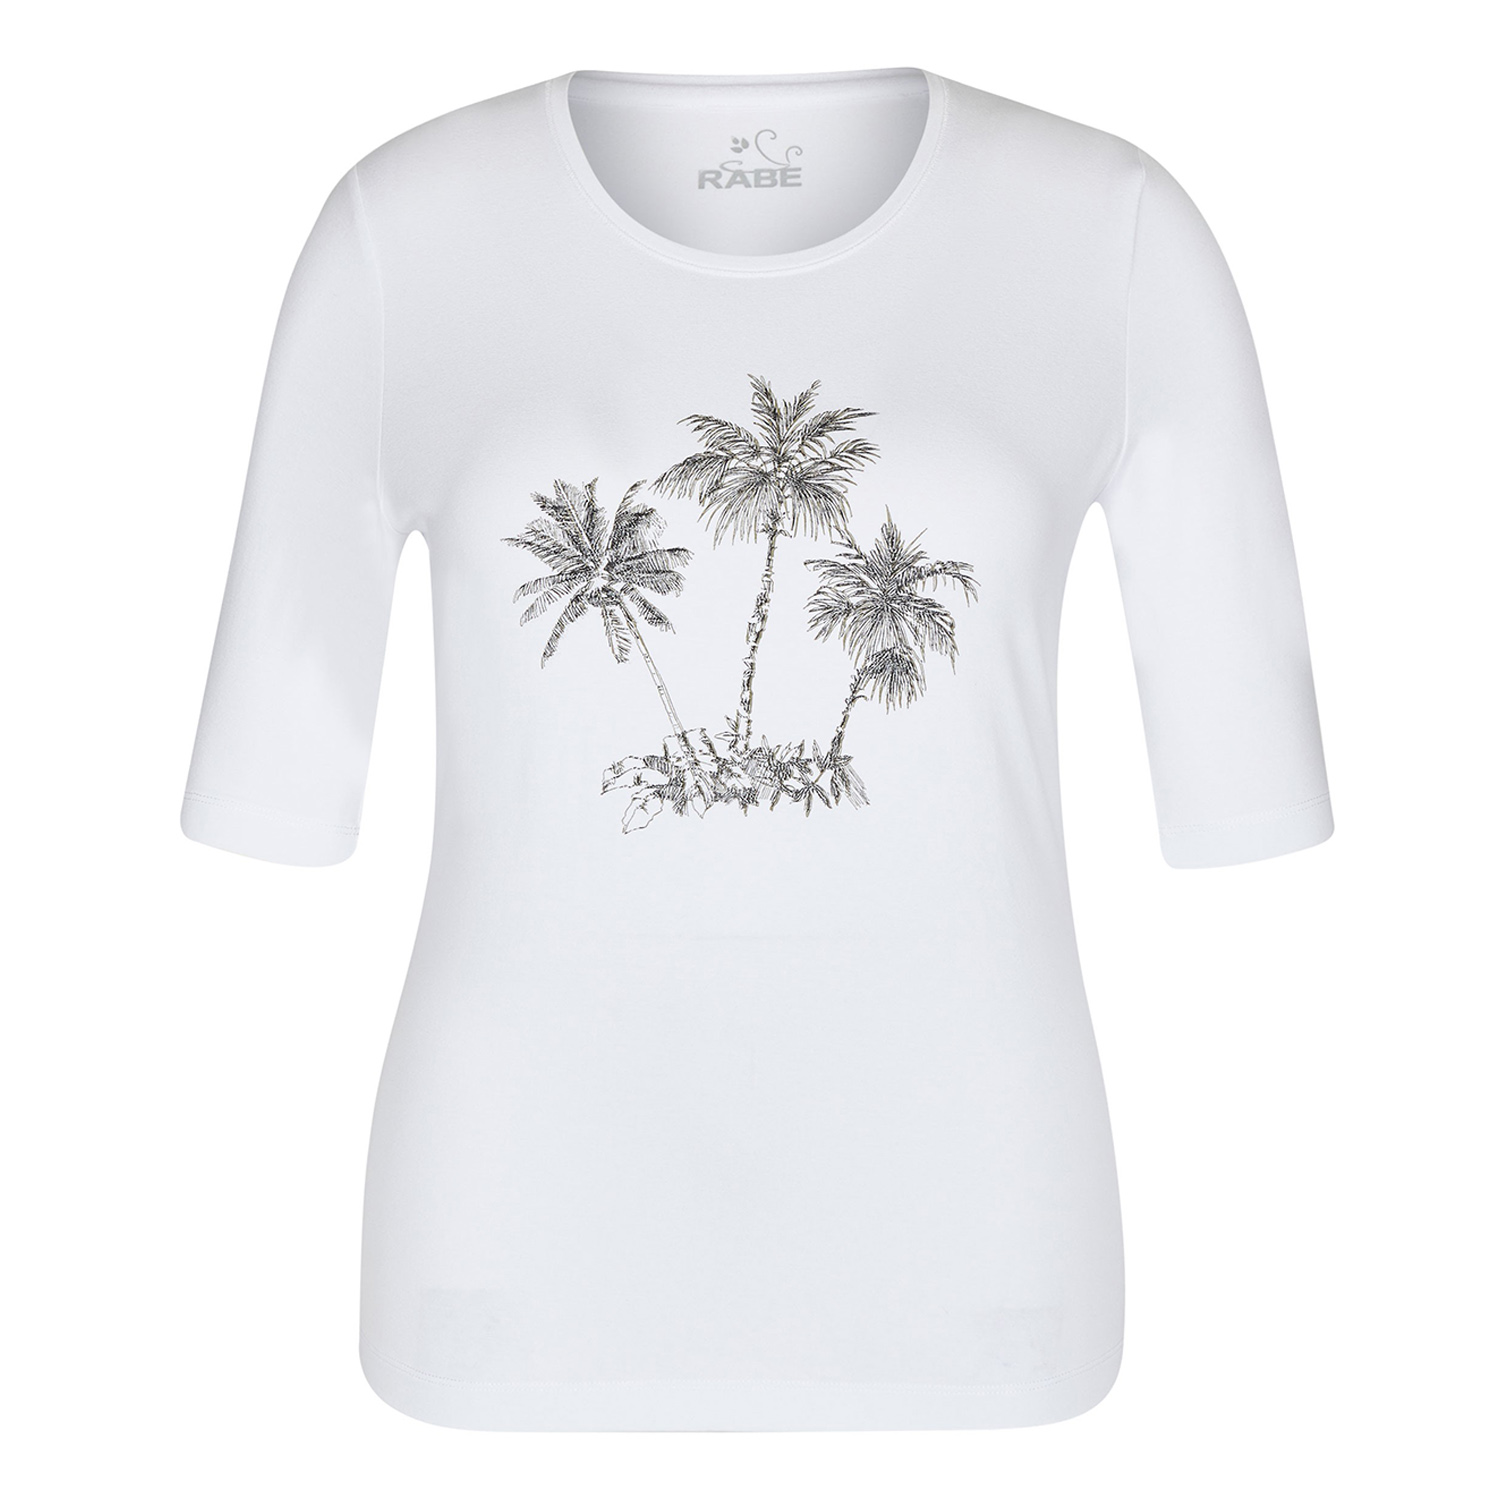 NECKLINE PRINT FRONT WITH WHITE AND RABE SHIRT T Obsessions ROUND IN –